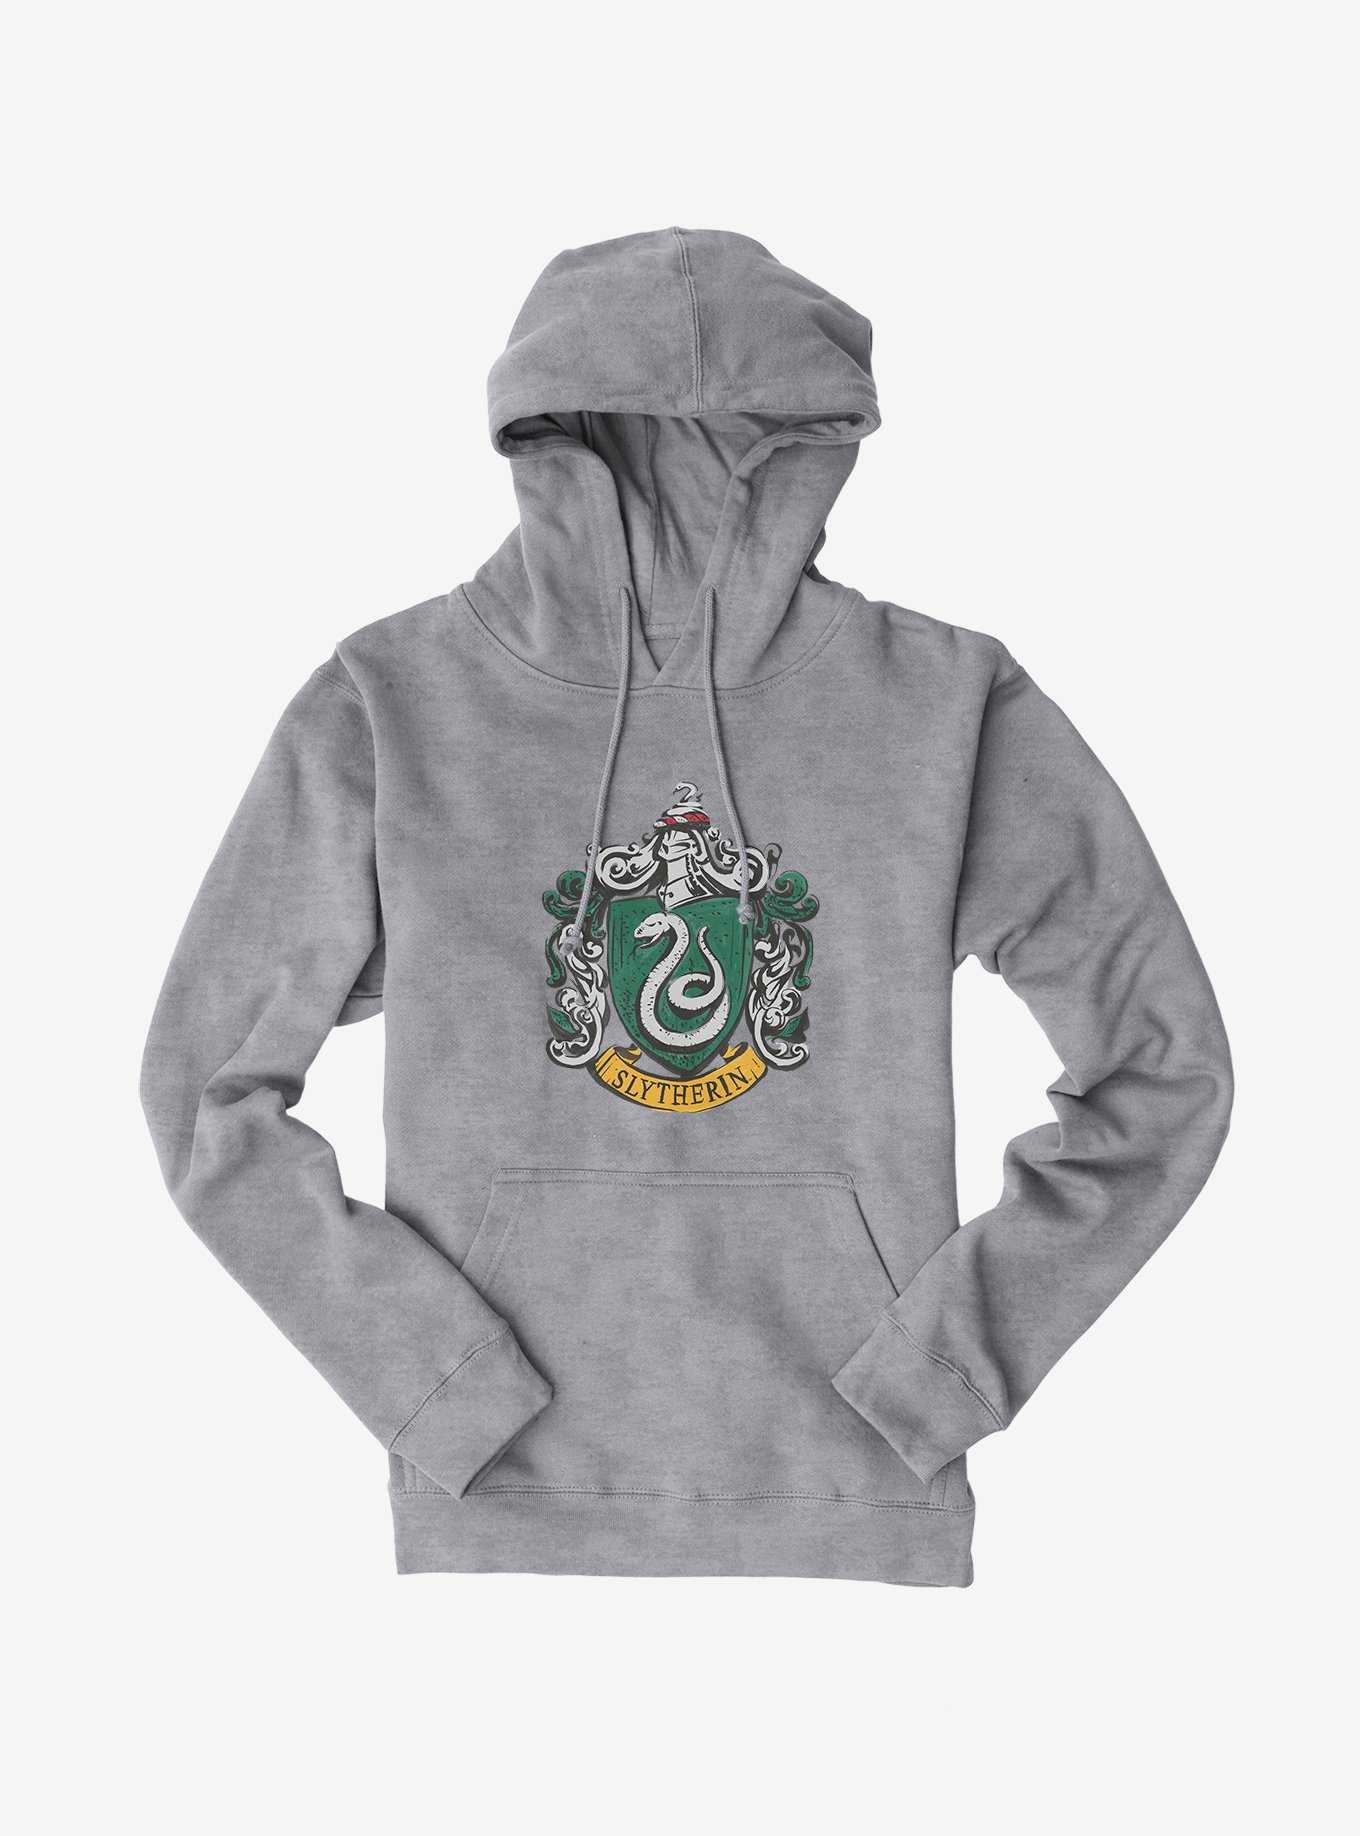 OFFICIAL Harry Potter Hoodies & Sweaters | Hot Topic | Hoodies